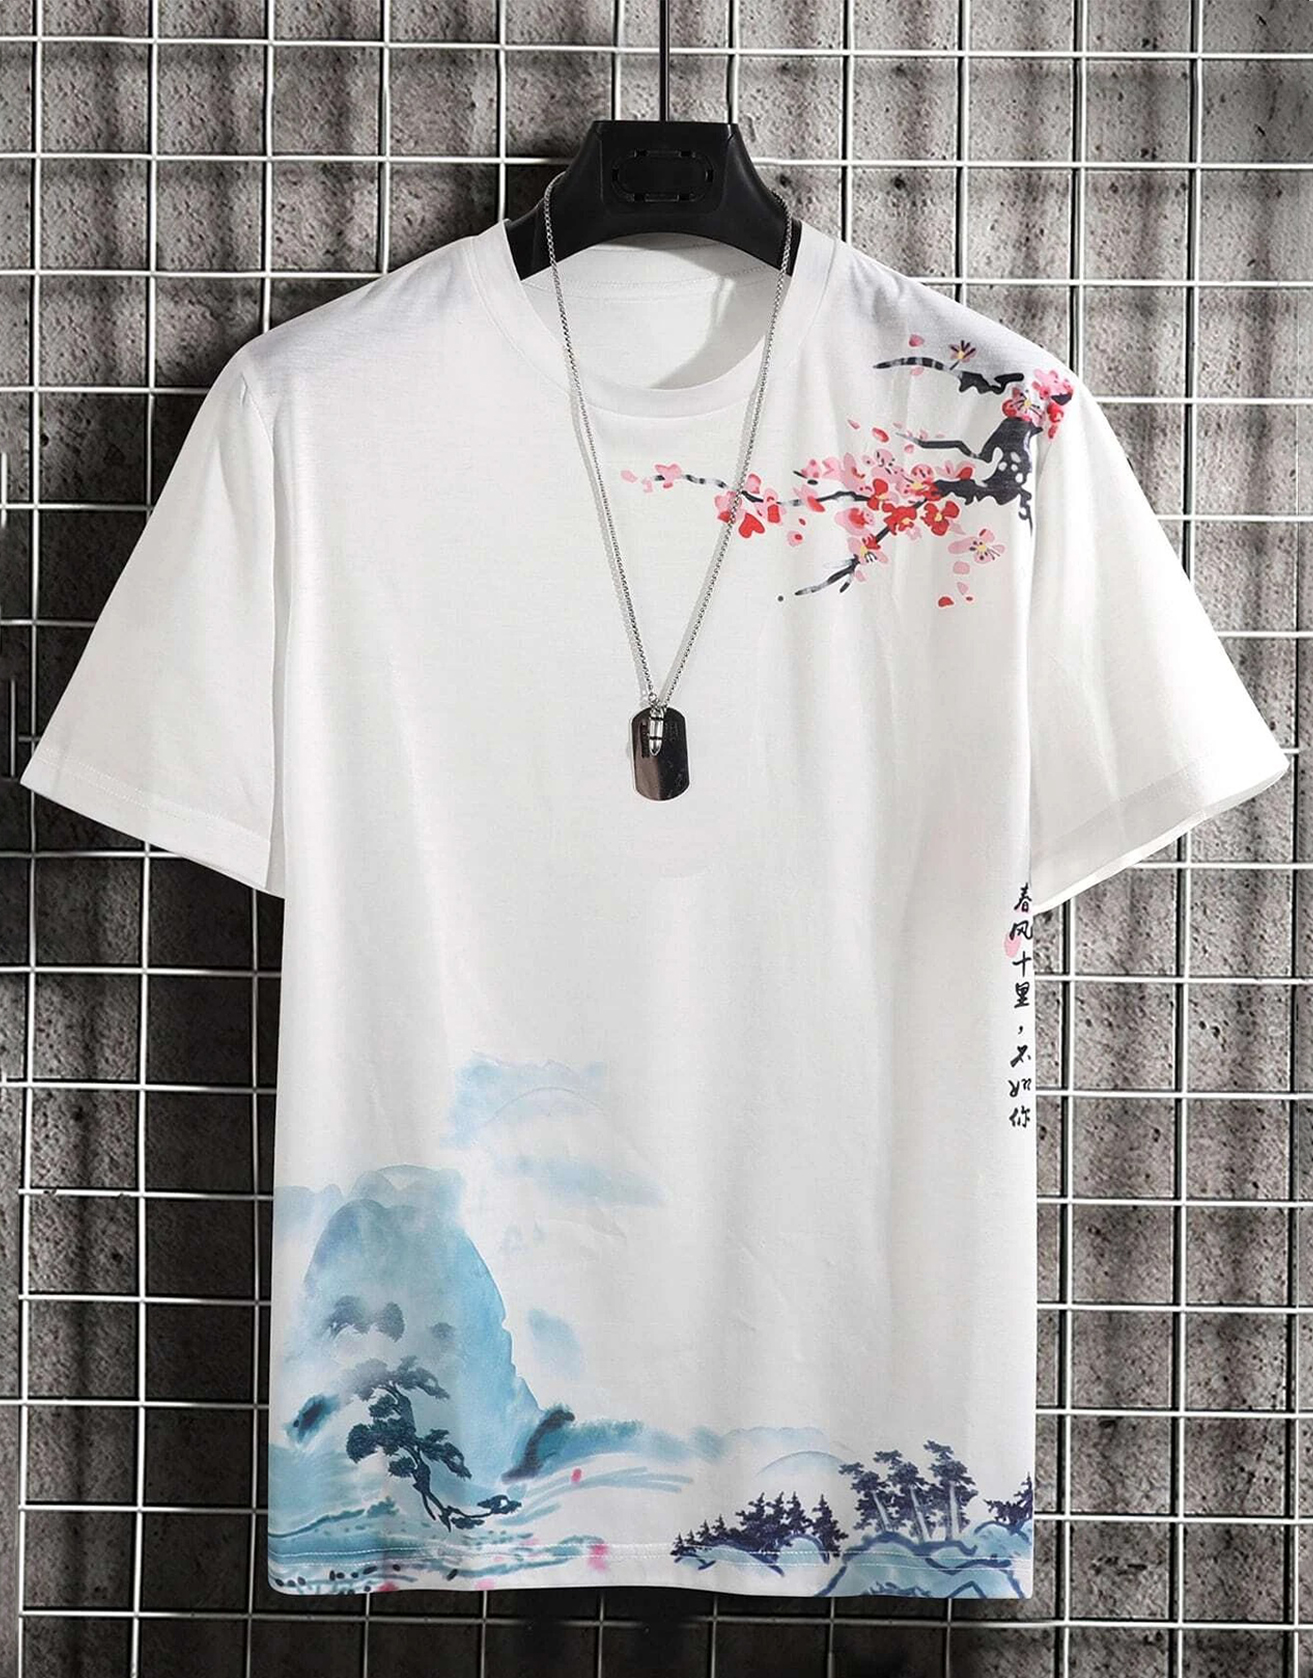 Manfinity Homme Men Floral & Chinese Letter Graphic Tee / TECHWEAR CLUB / Techwear